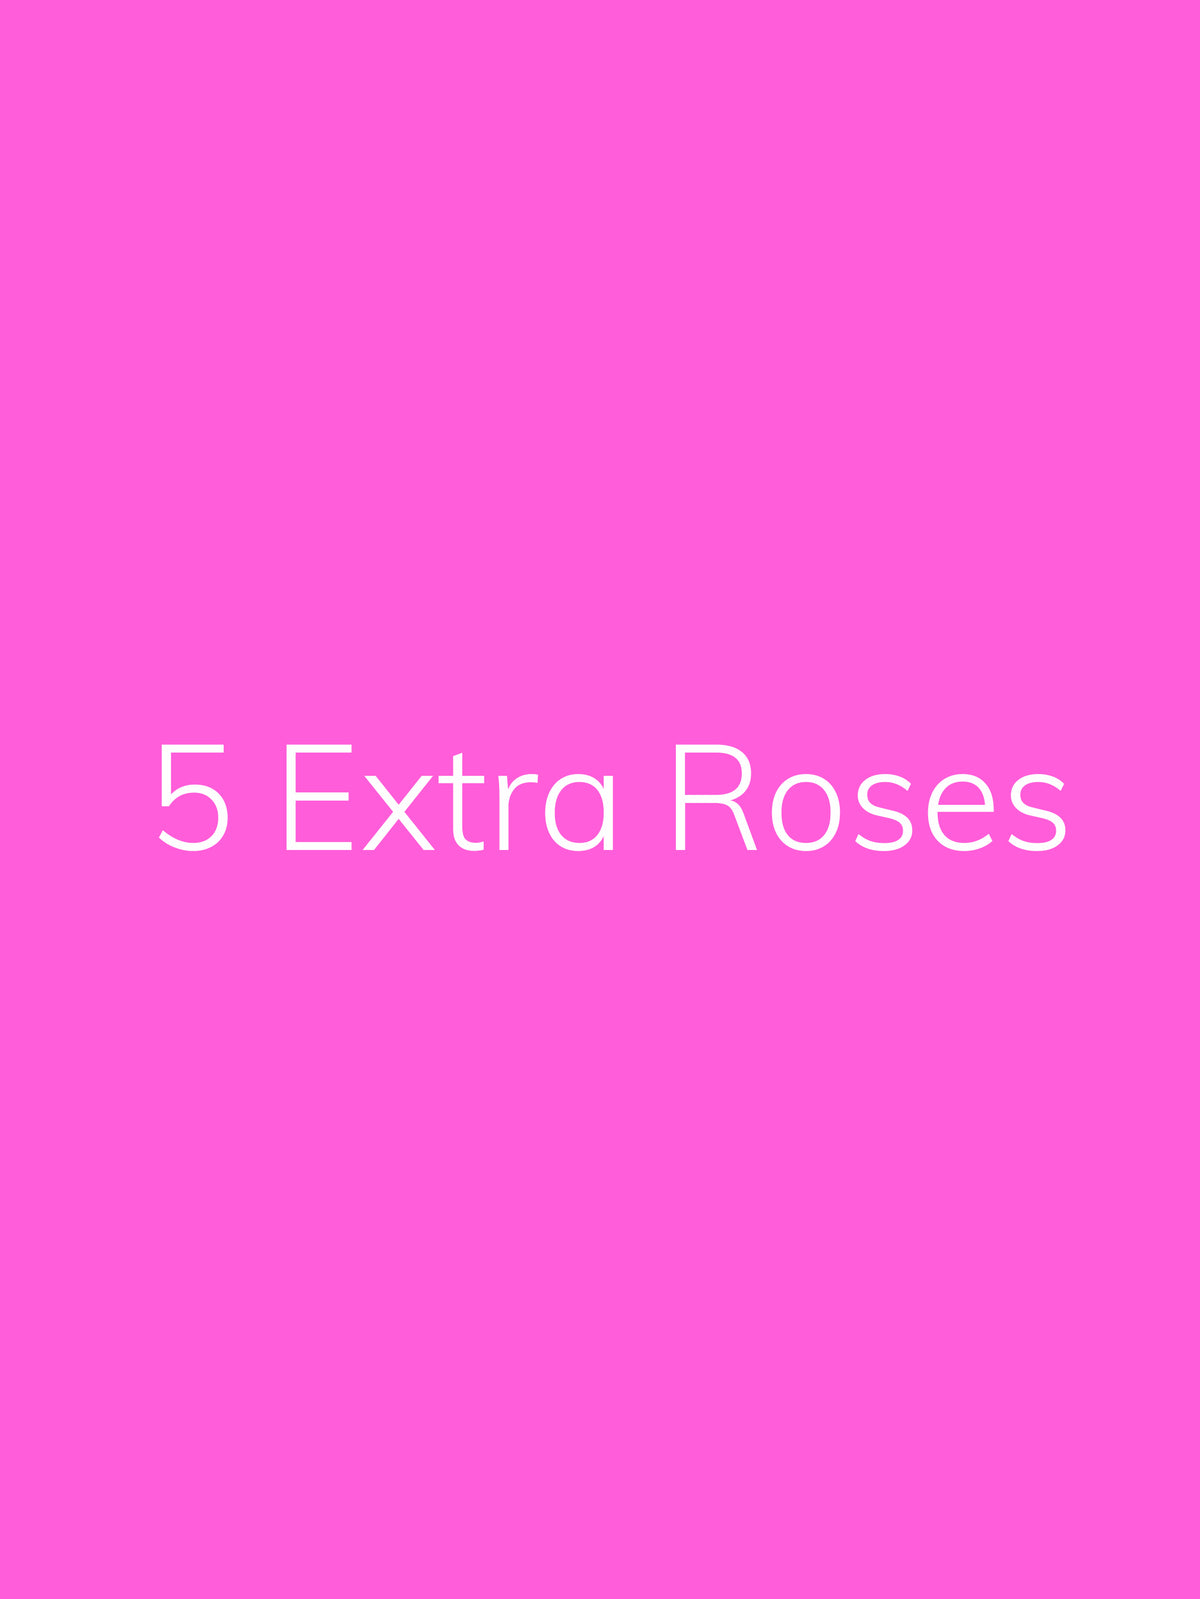 5 Extra Roses